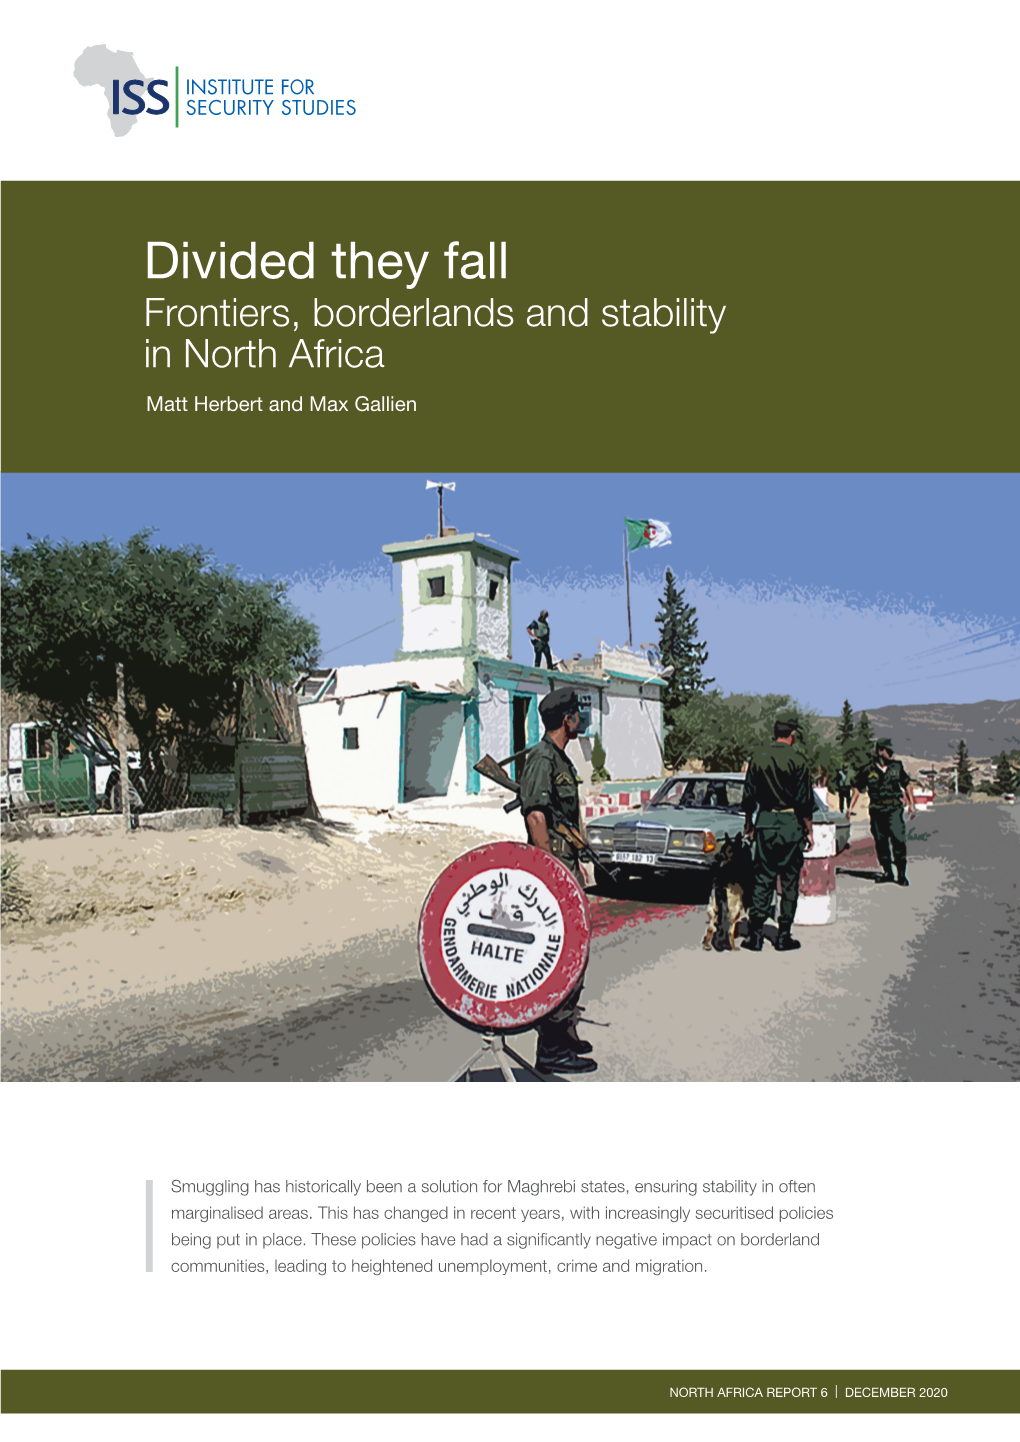 DIVIDED THEY FALL: FRONTIERS, BORDERLANDS and STABILITY in NORTH AFRICA Introduction Smugglers and Migrants